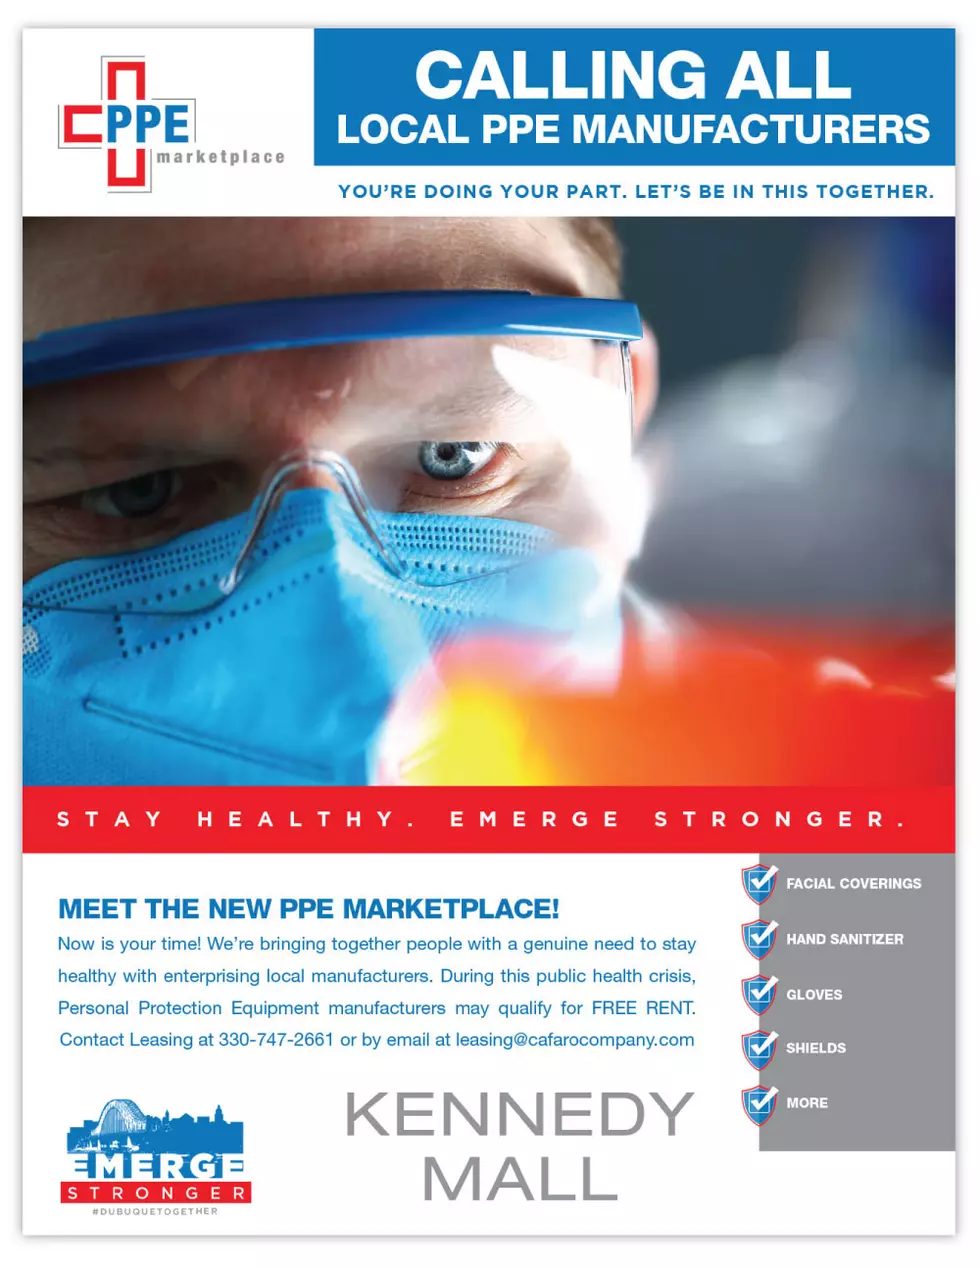 Kennedy Mall is Calling All Local PPE Manufacturers